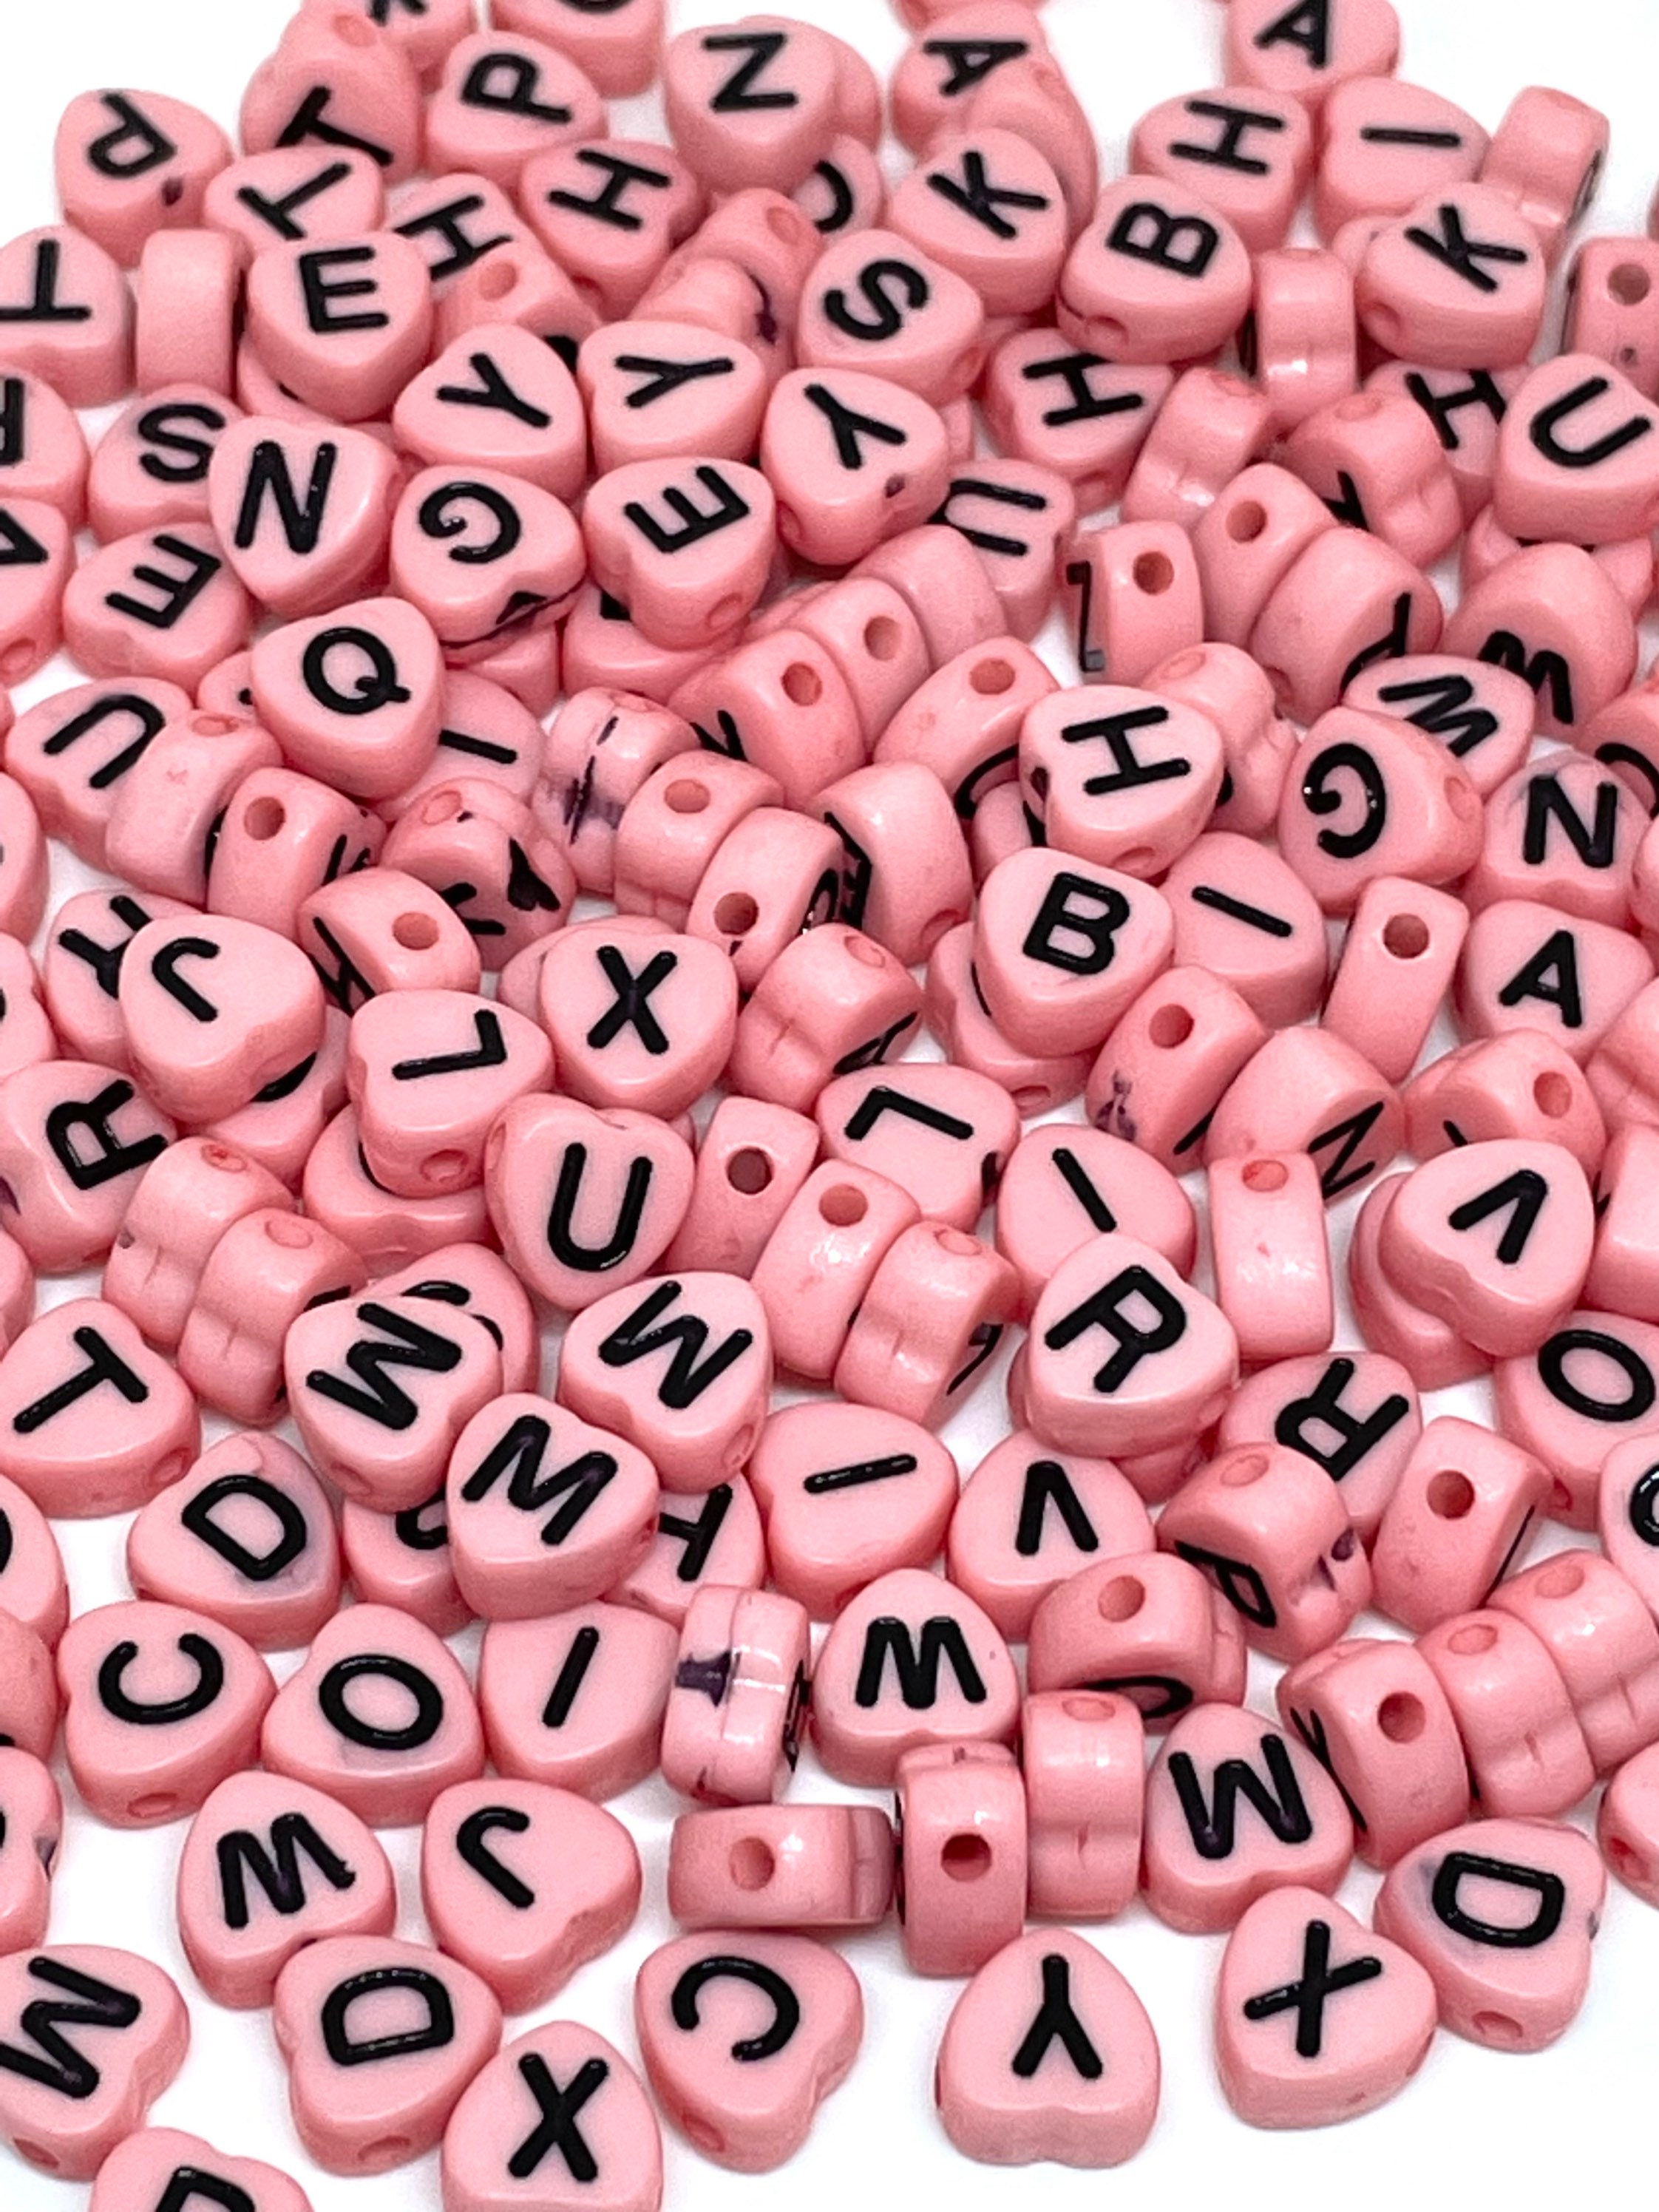 Coral Pink Letter Beads, Heart Alphabet Beads, Name Beads for Custom  Bracelet, Letter Beads for Necklace, 7mm Beads